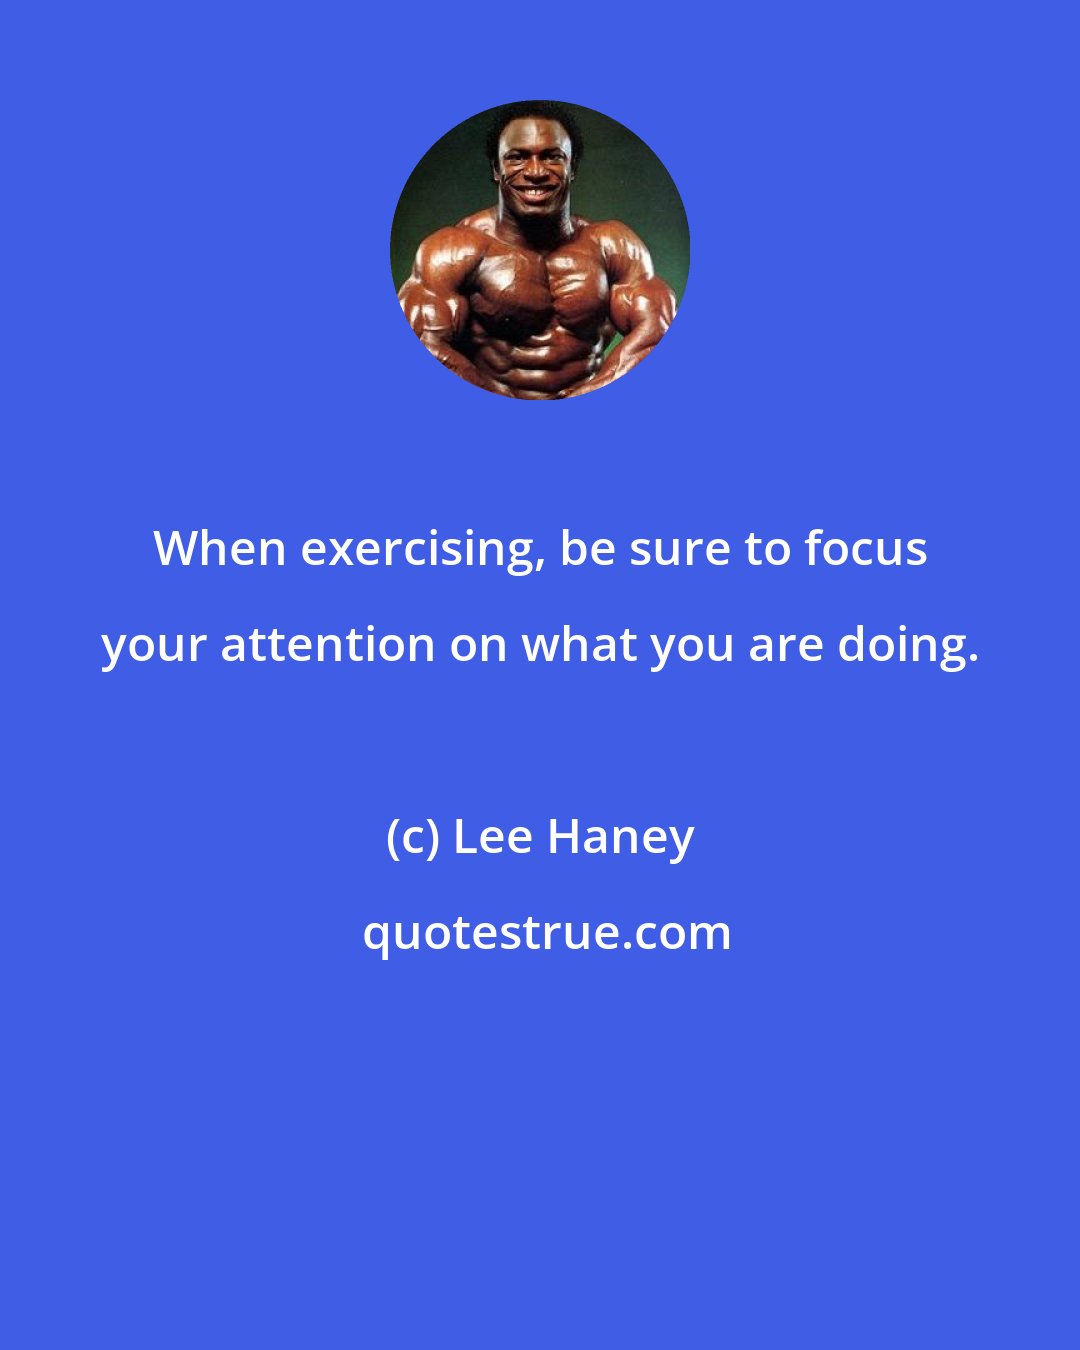 Lee Haney: When exercising, be sure to focus your attention on what you are doing.